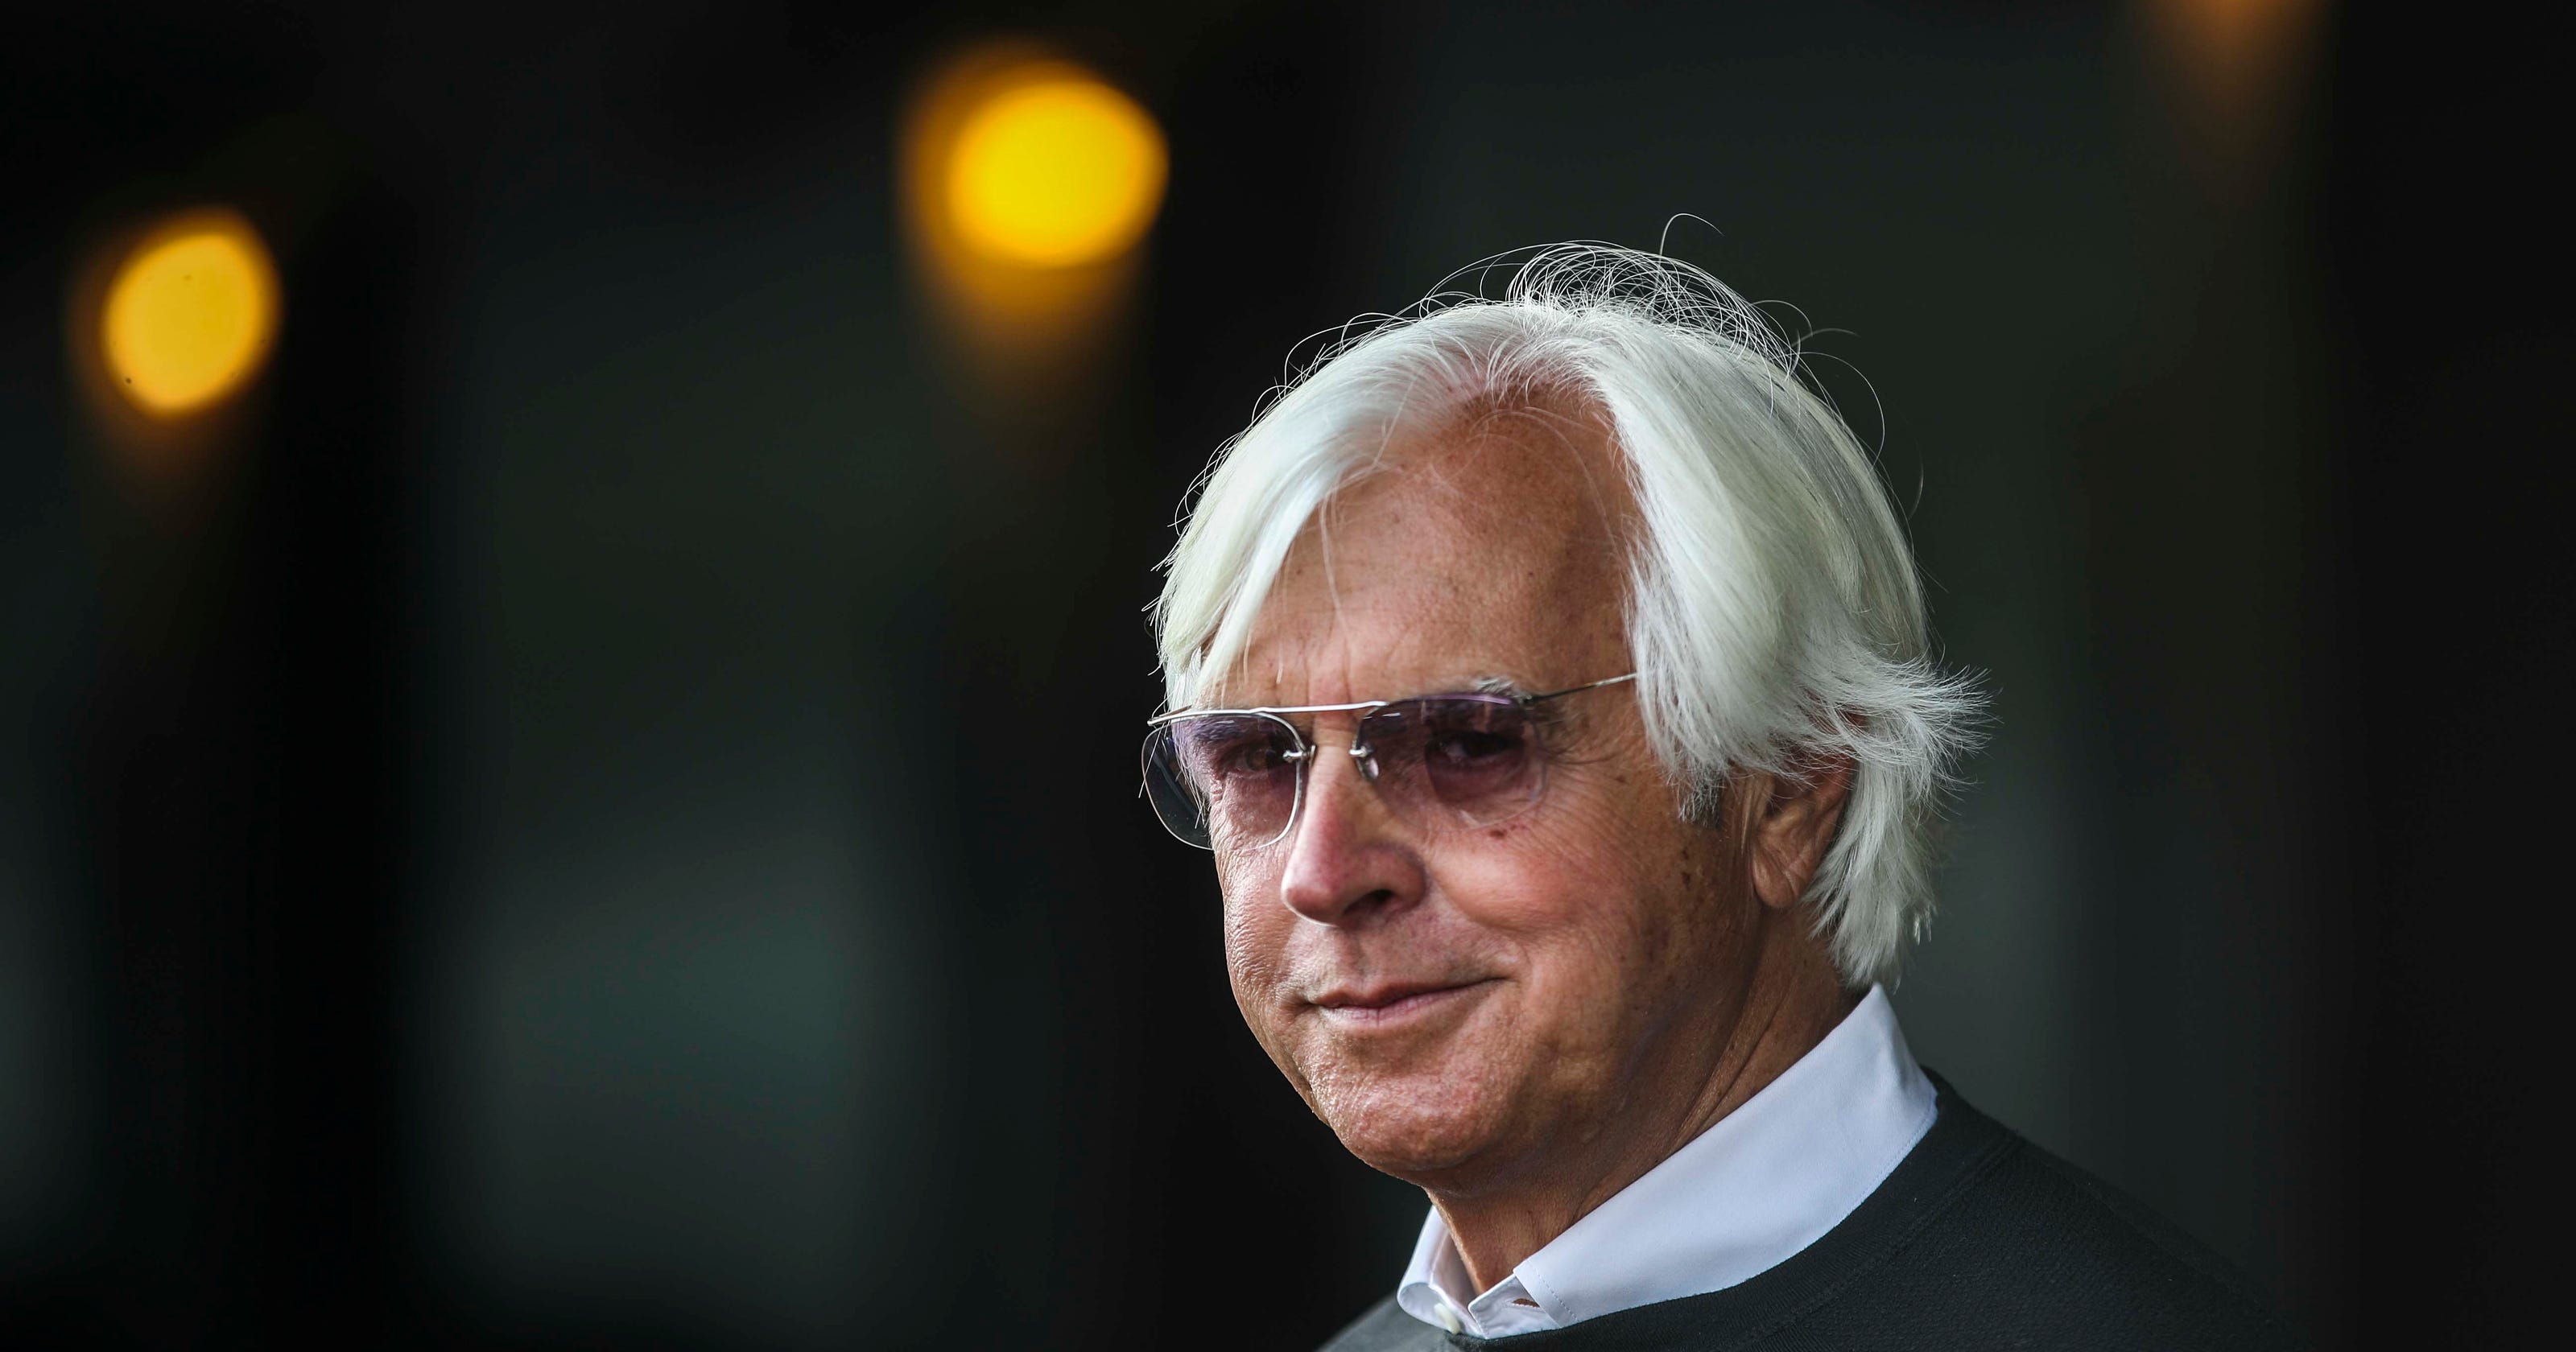 Preakness 2019: Bob Baffert's Improbable now likely favorite, good weather forecast